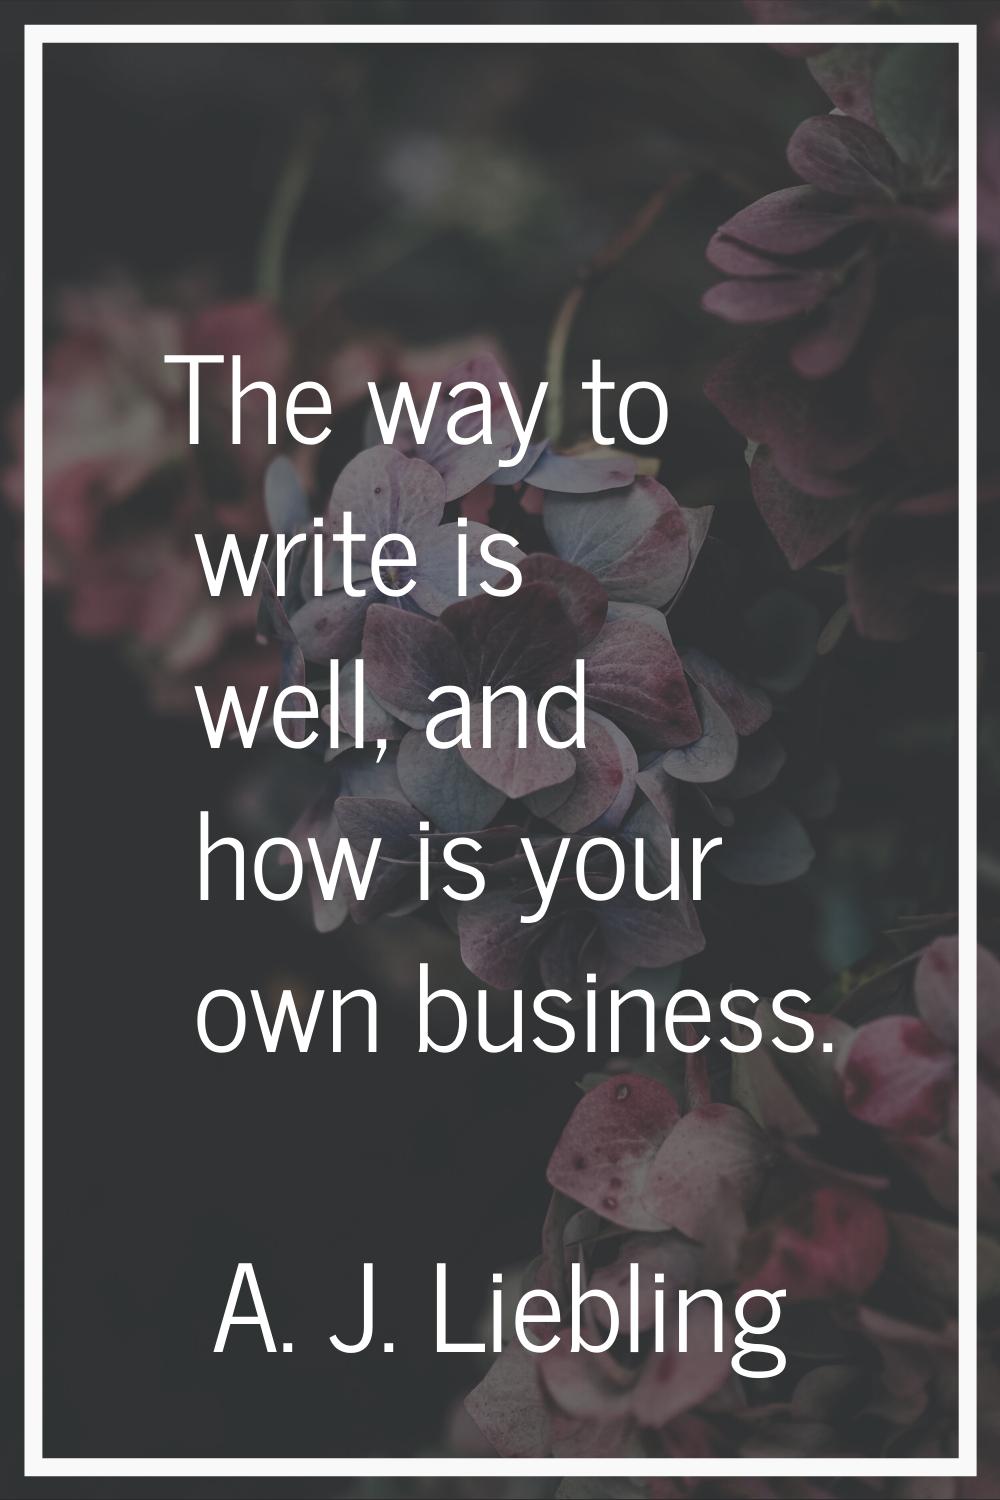 The way to write is well, and how is your own business.